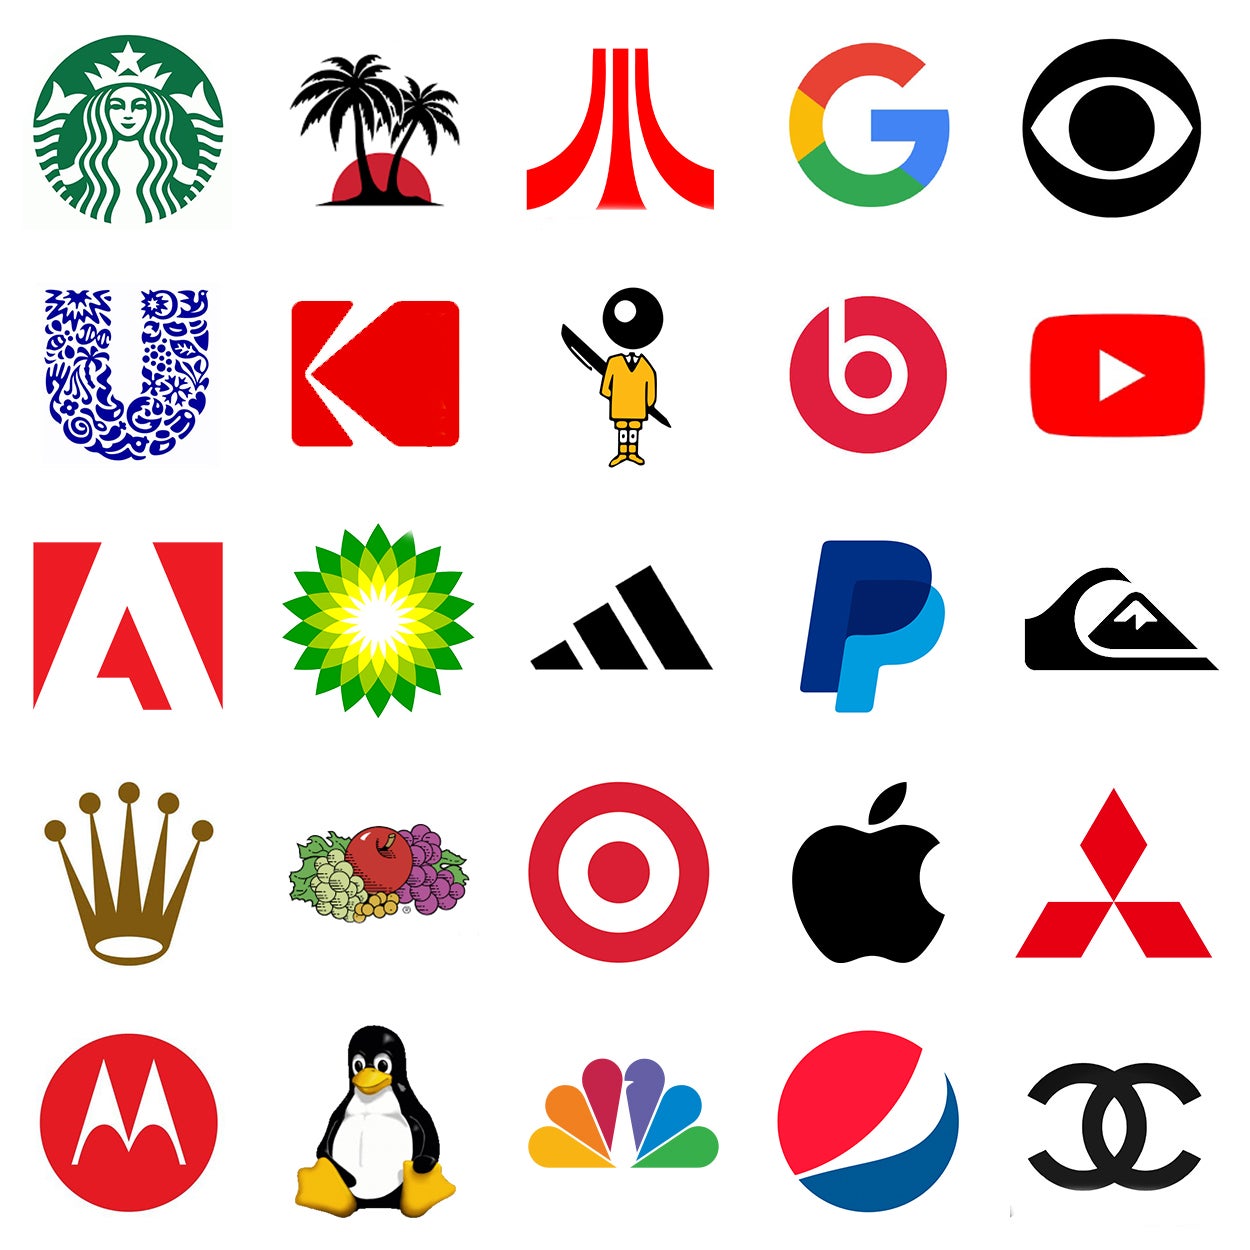 Most People Can\'t Identify 12 Of These Logos — Can You?